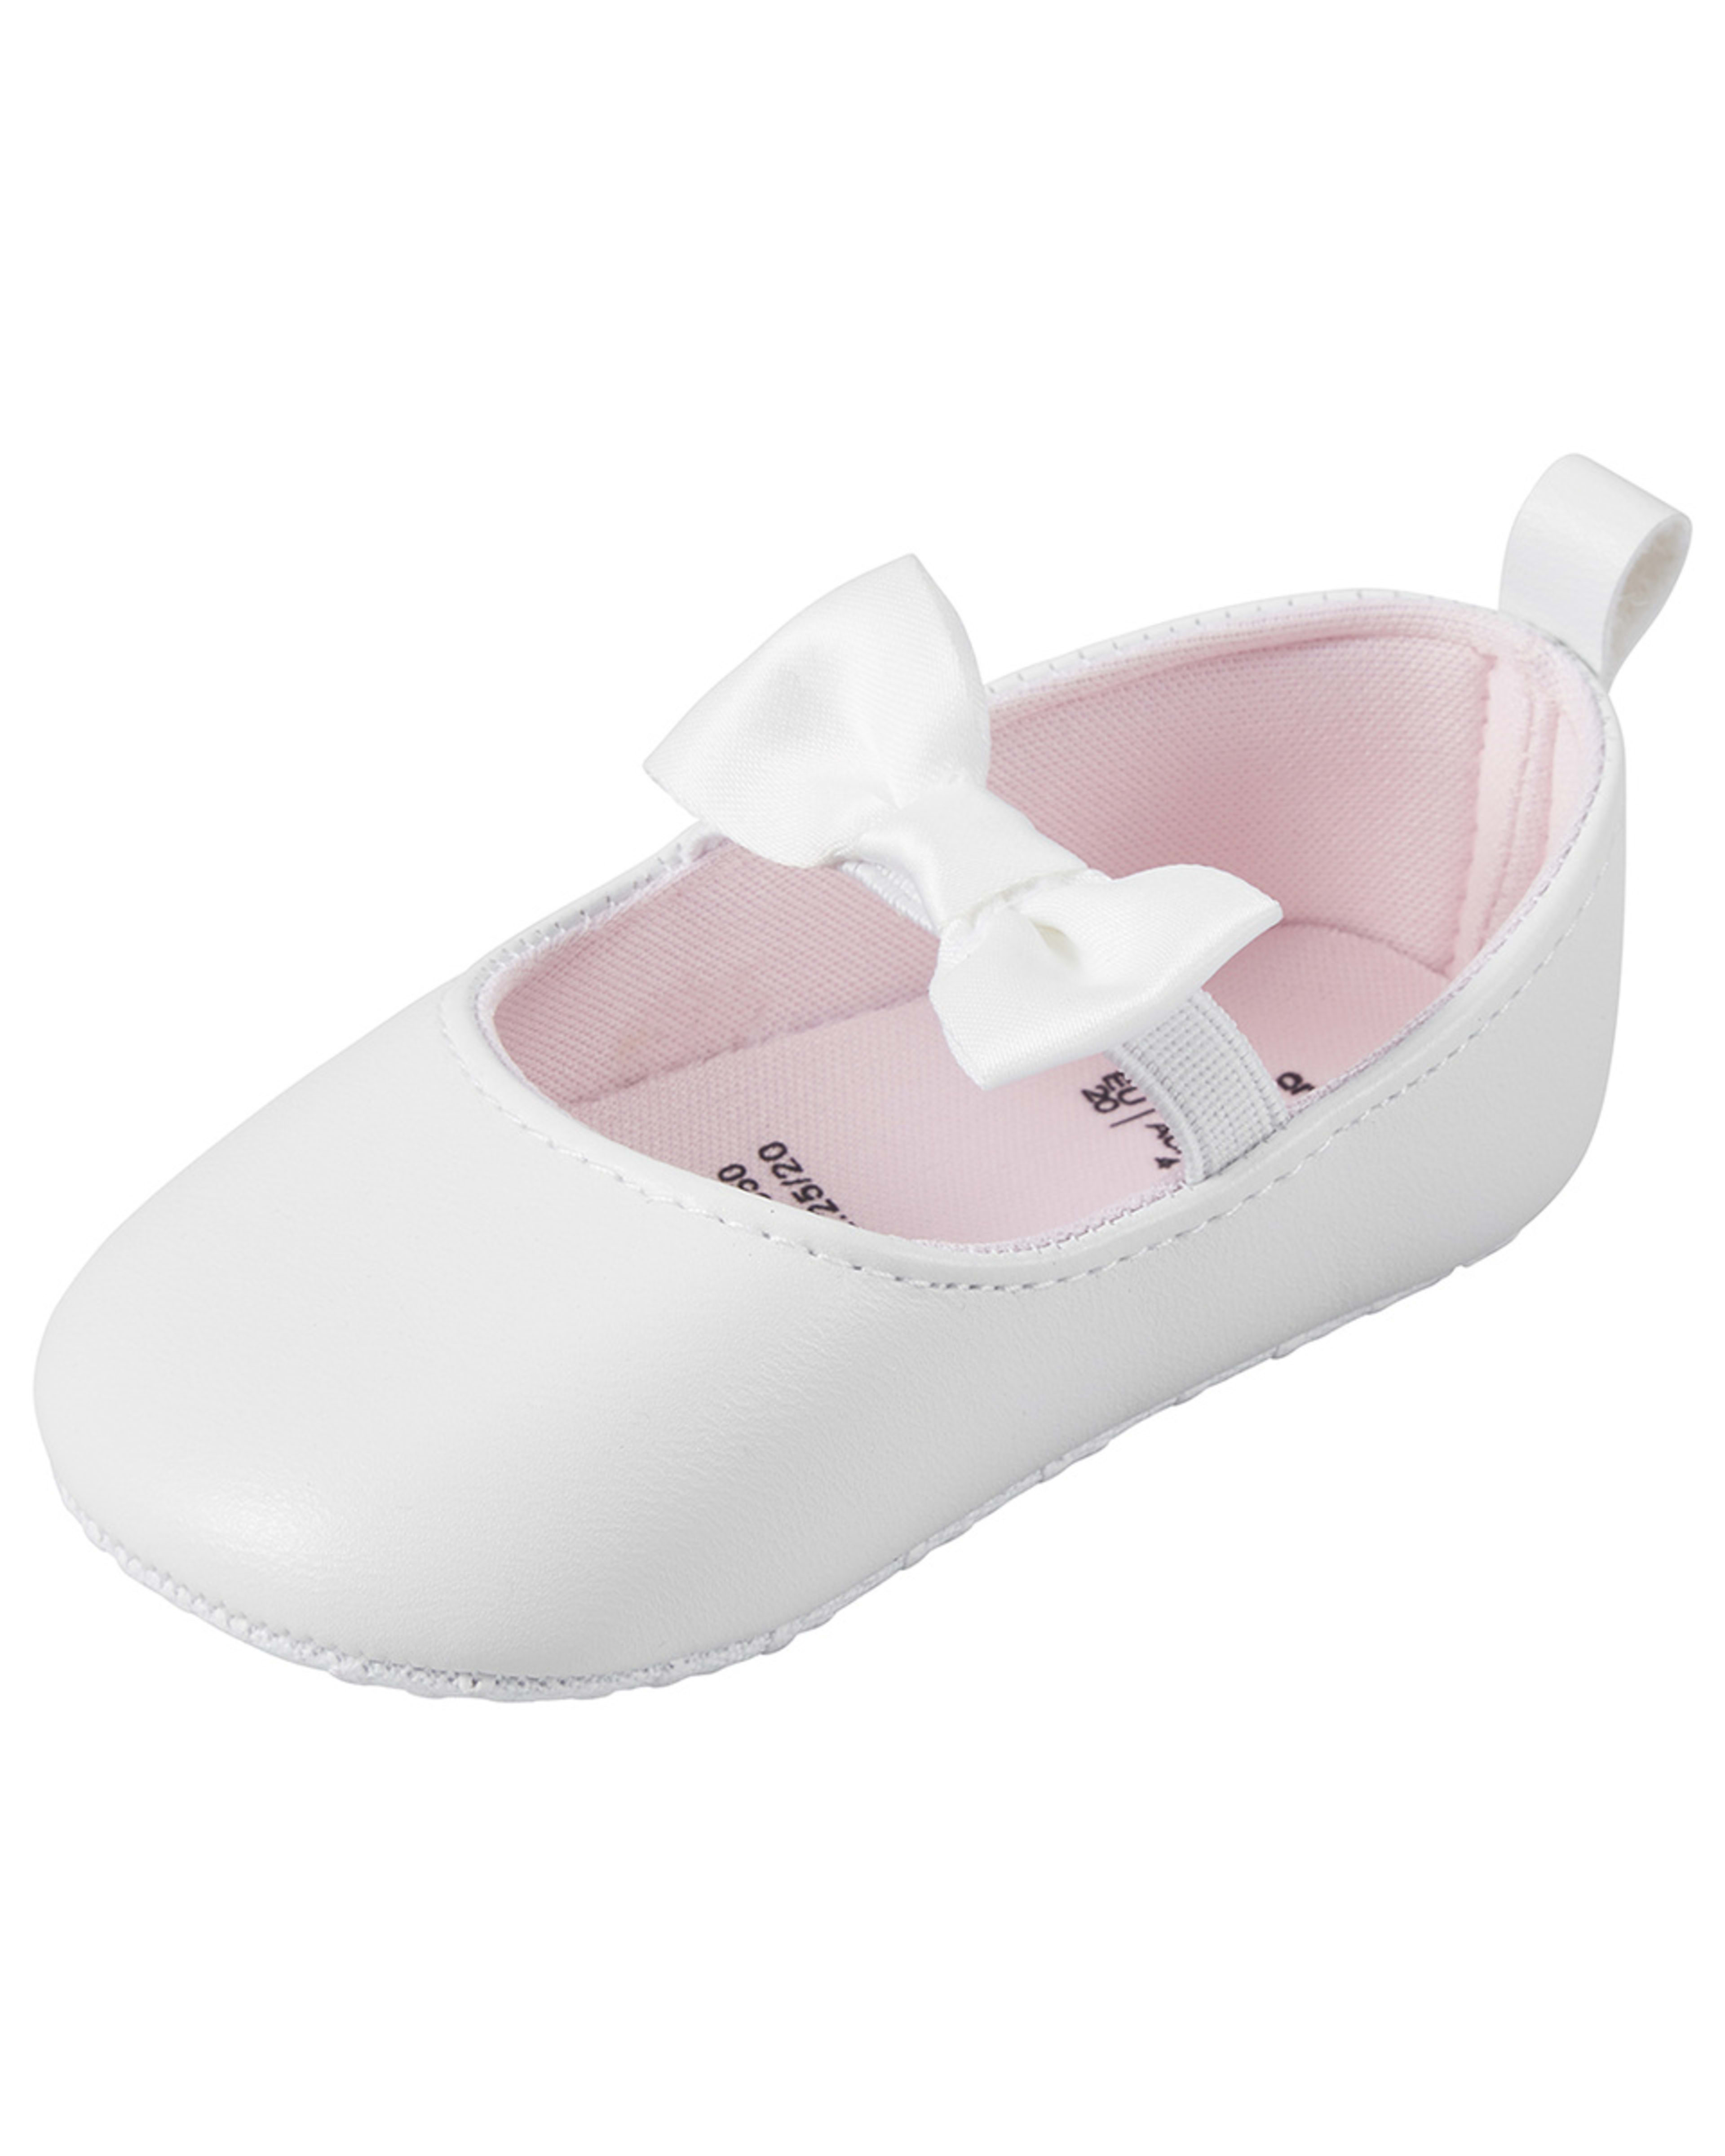 Baby A-Bar Shoes - Kmart